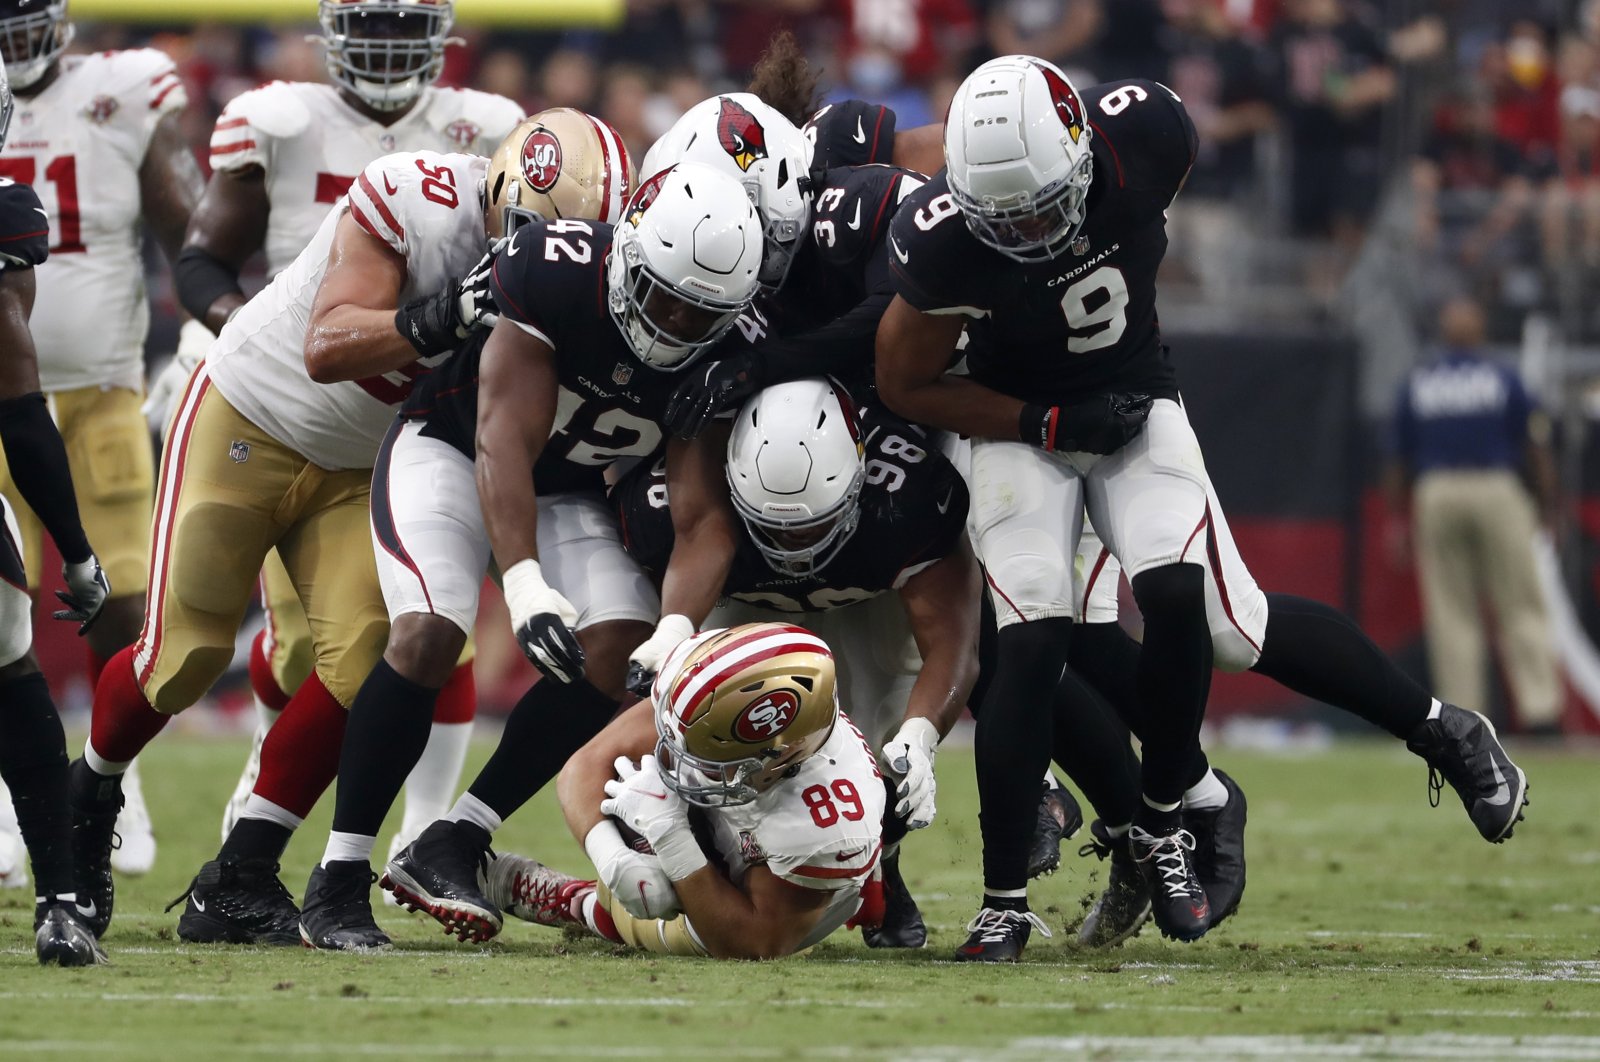 San Francisco 49ers tight end Charlie Woerner (89) is tackled by Arizona Cardinals outside linebacker Devon Kennard (42), defensive tackle Corey Peters (98) and linebacker Isaiah Simmons (9) during the second half at State Farm Stadium, Glendale, Arizona, U.S., Oct. 10, 2021. (Chris Coduto-USA TODAY Sports via Reuters)